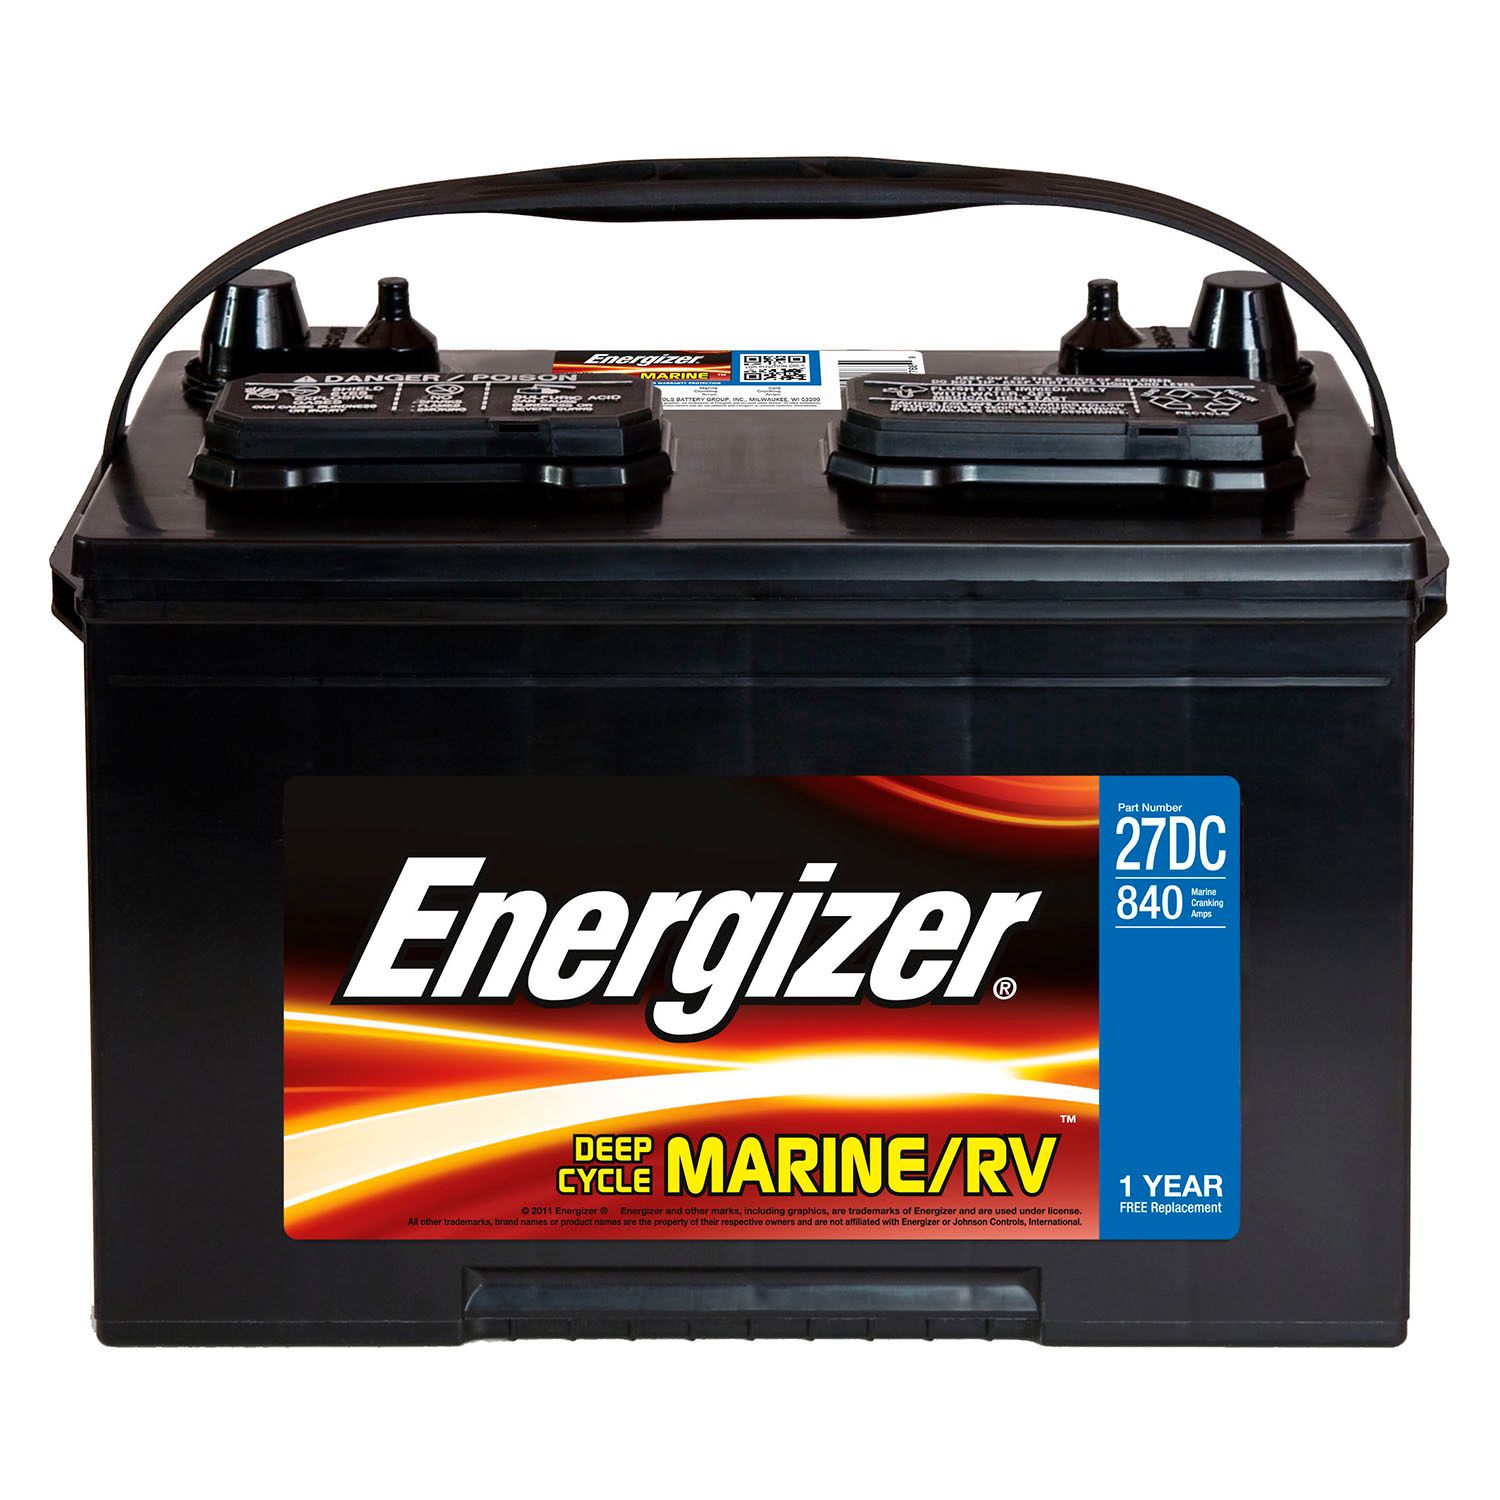 If possible, batteries should be removed from your boat and stored at home where they can take on a trickle charge all winter long.